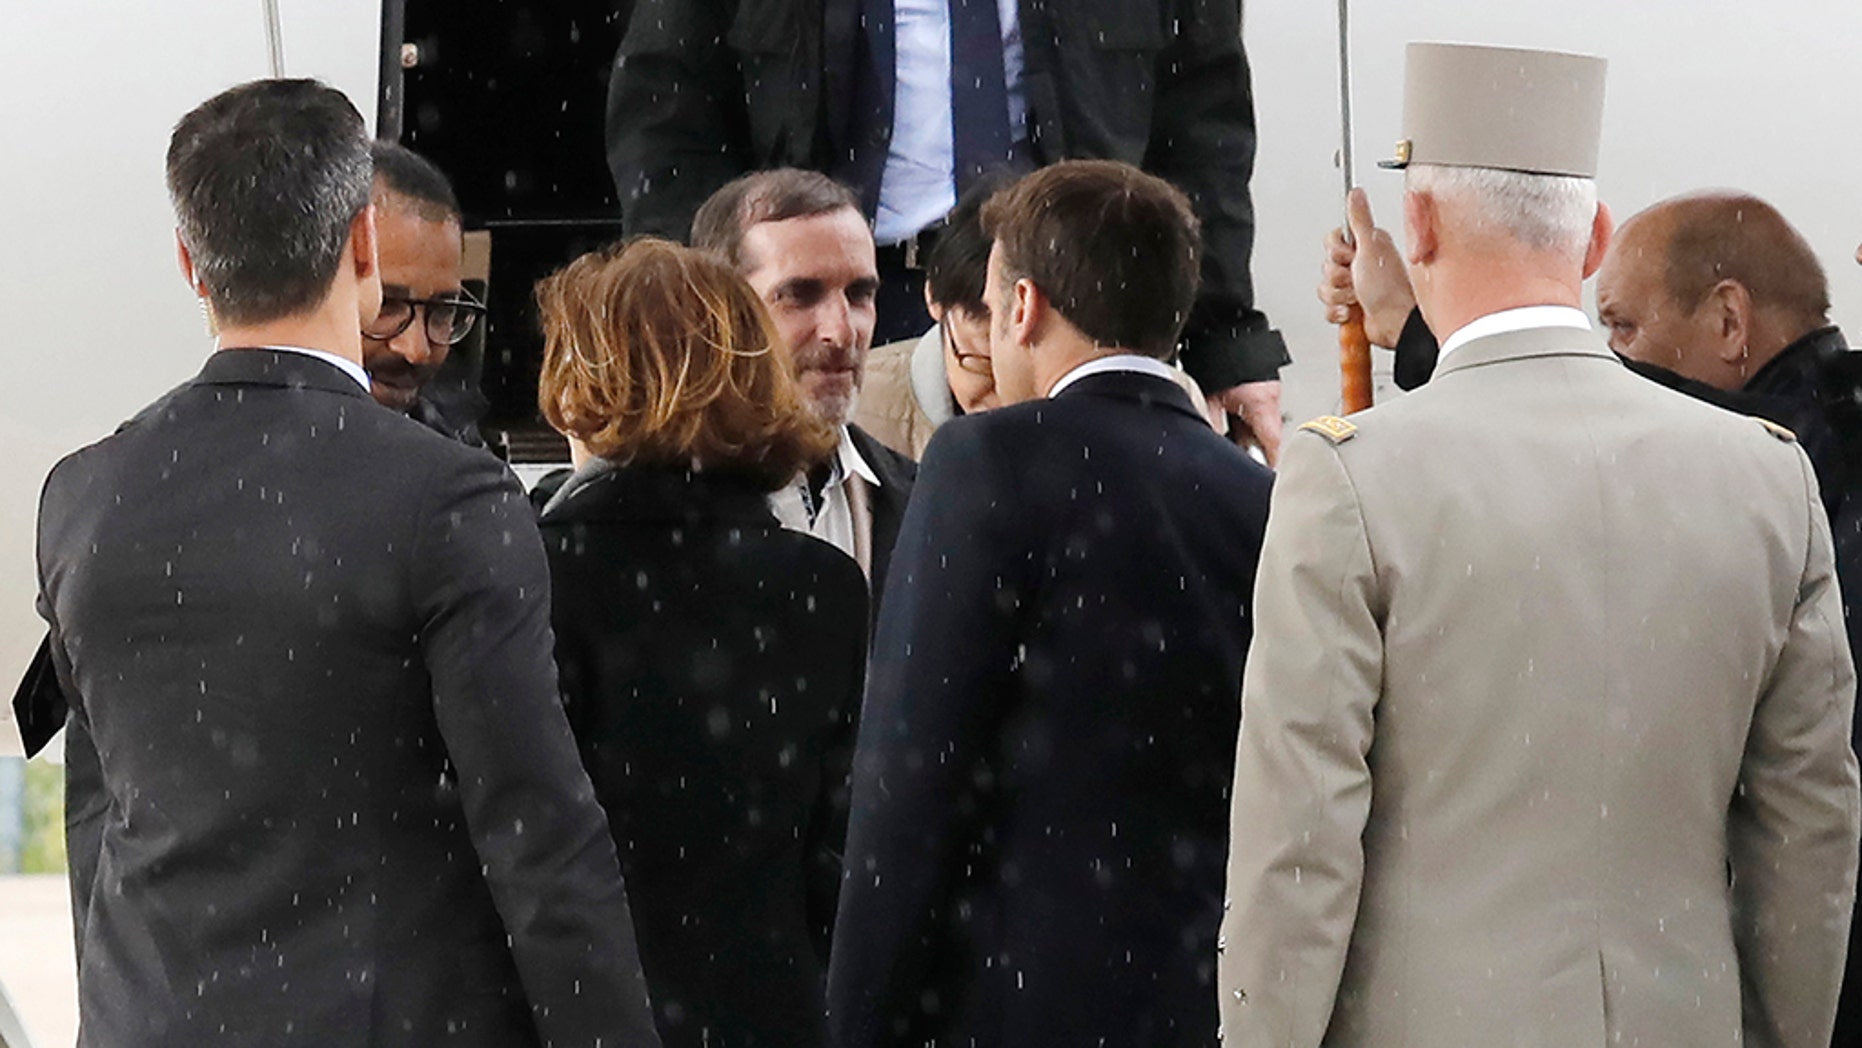 Freed French hostages Laurent Lassimouillas, left, and Patrick Picque, 2nd right, are welcomed by French President Emmanuel Macron, right, and Defense and Minister Florence Parly, 2nd left, at Villacoublay's military airport, west of Paris, France, Saturday, May 11, 2019. Officials said two French special forces officers and four 